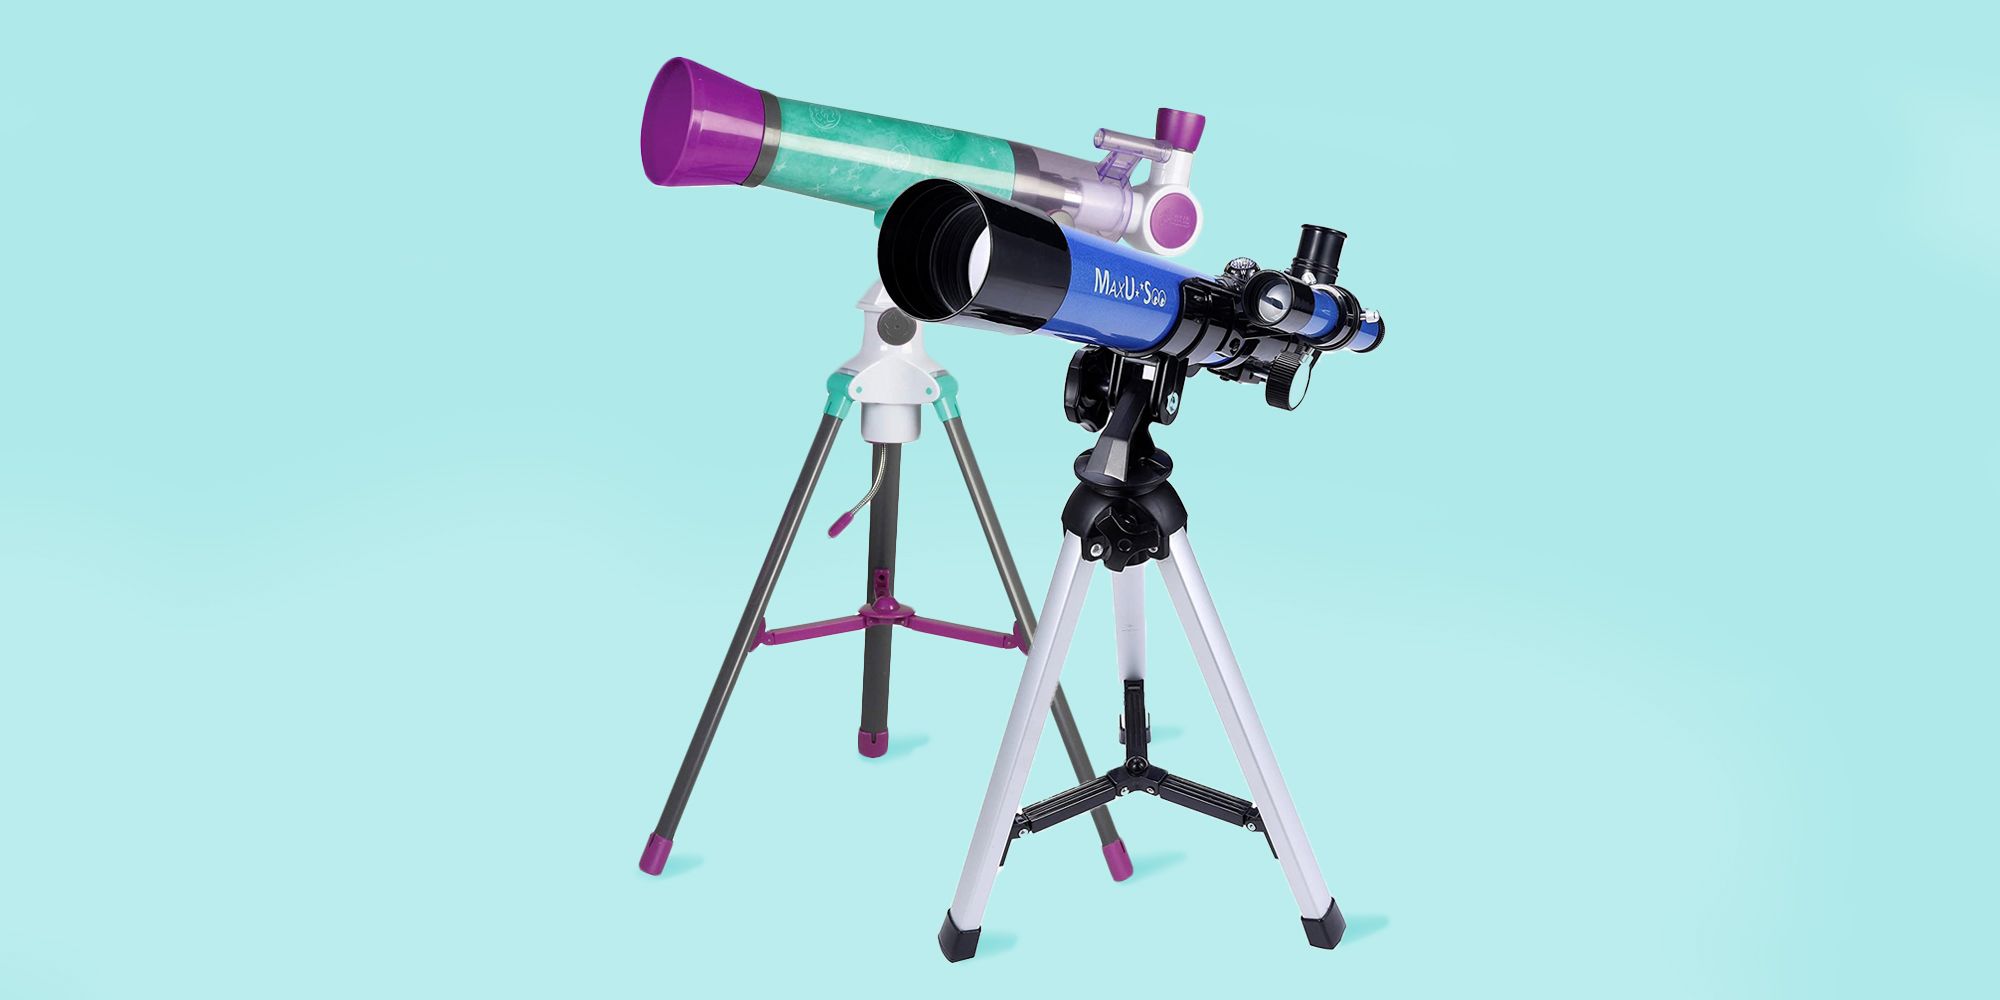 Telescope for Children Kids Astronomical Telescope Educational Toy with Tripod Monocular Space Astronomical Telescope for Kids Educational Gift Toy 